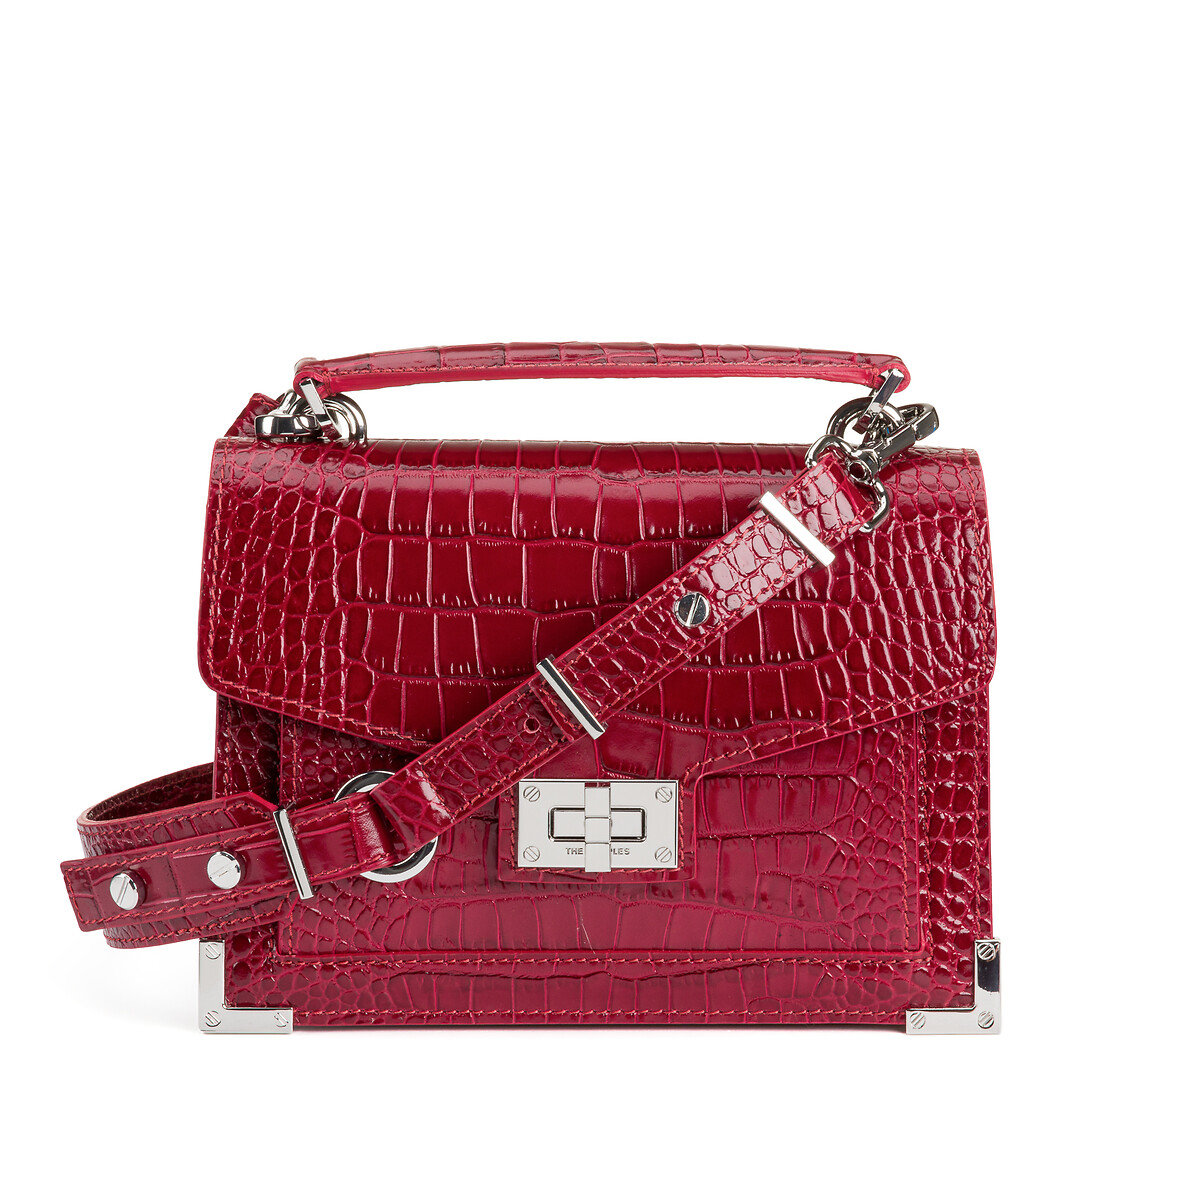 Small red Emily bag | The Kooples